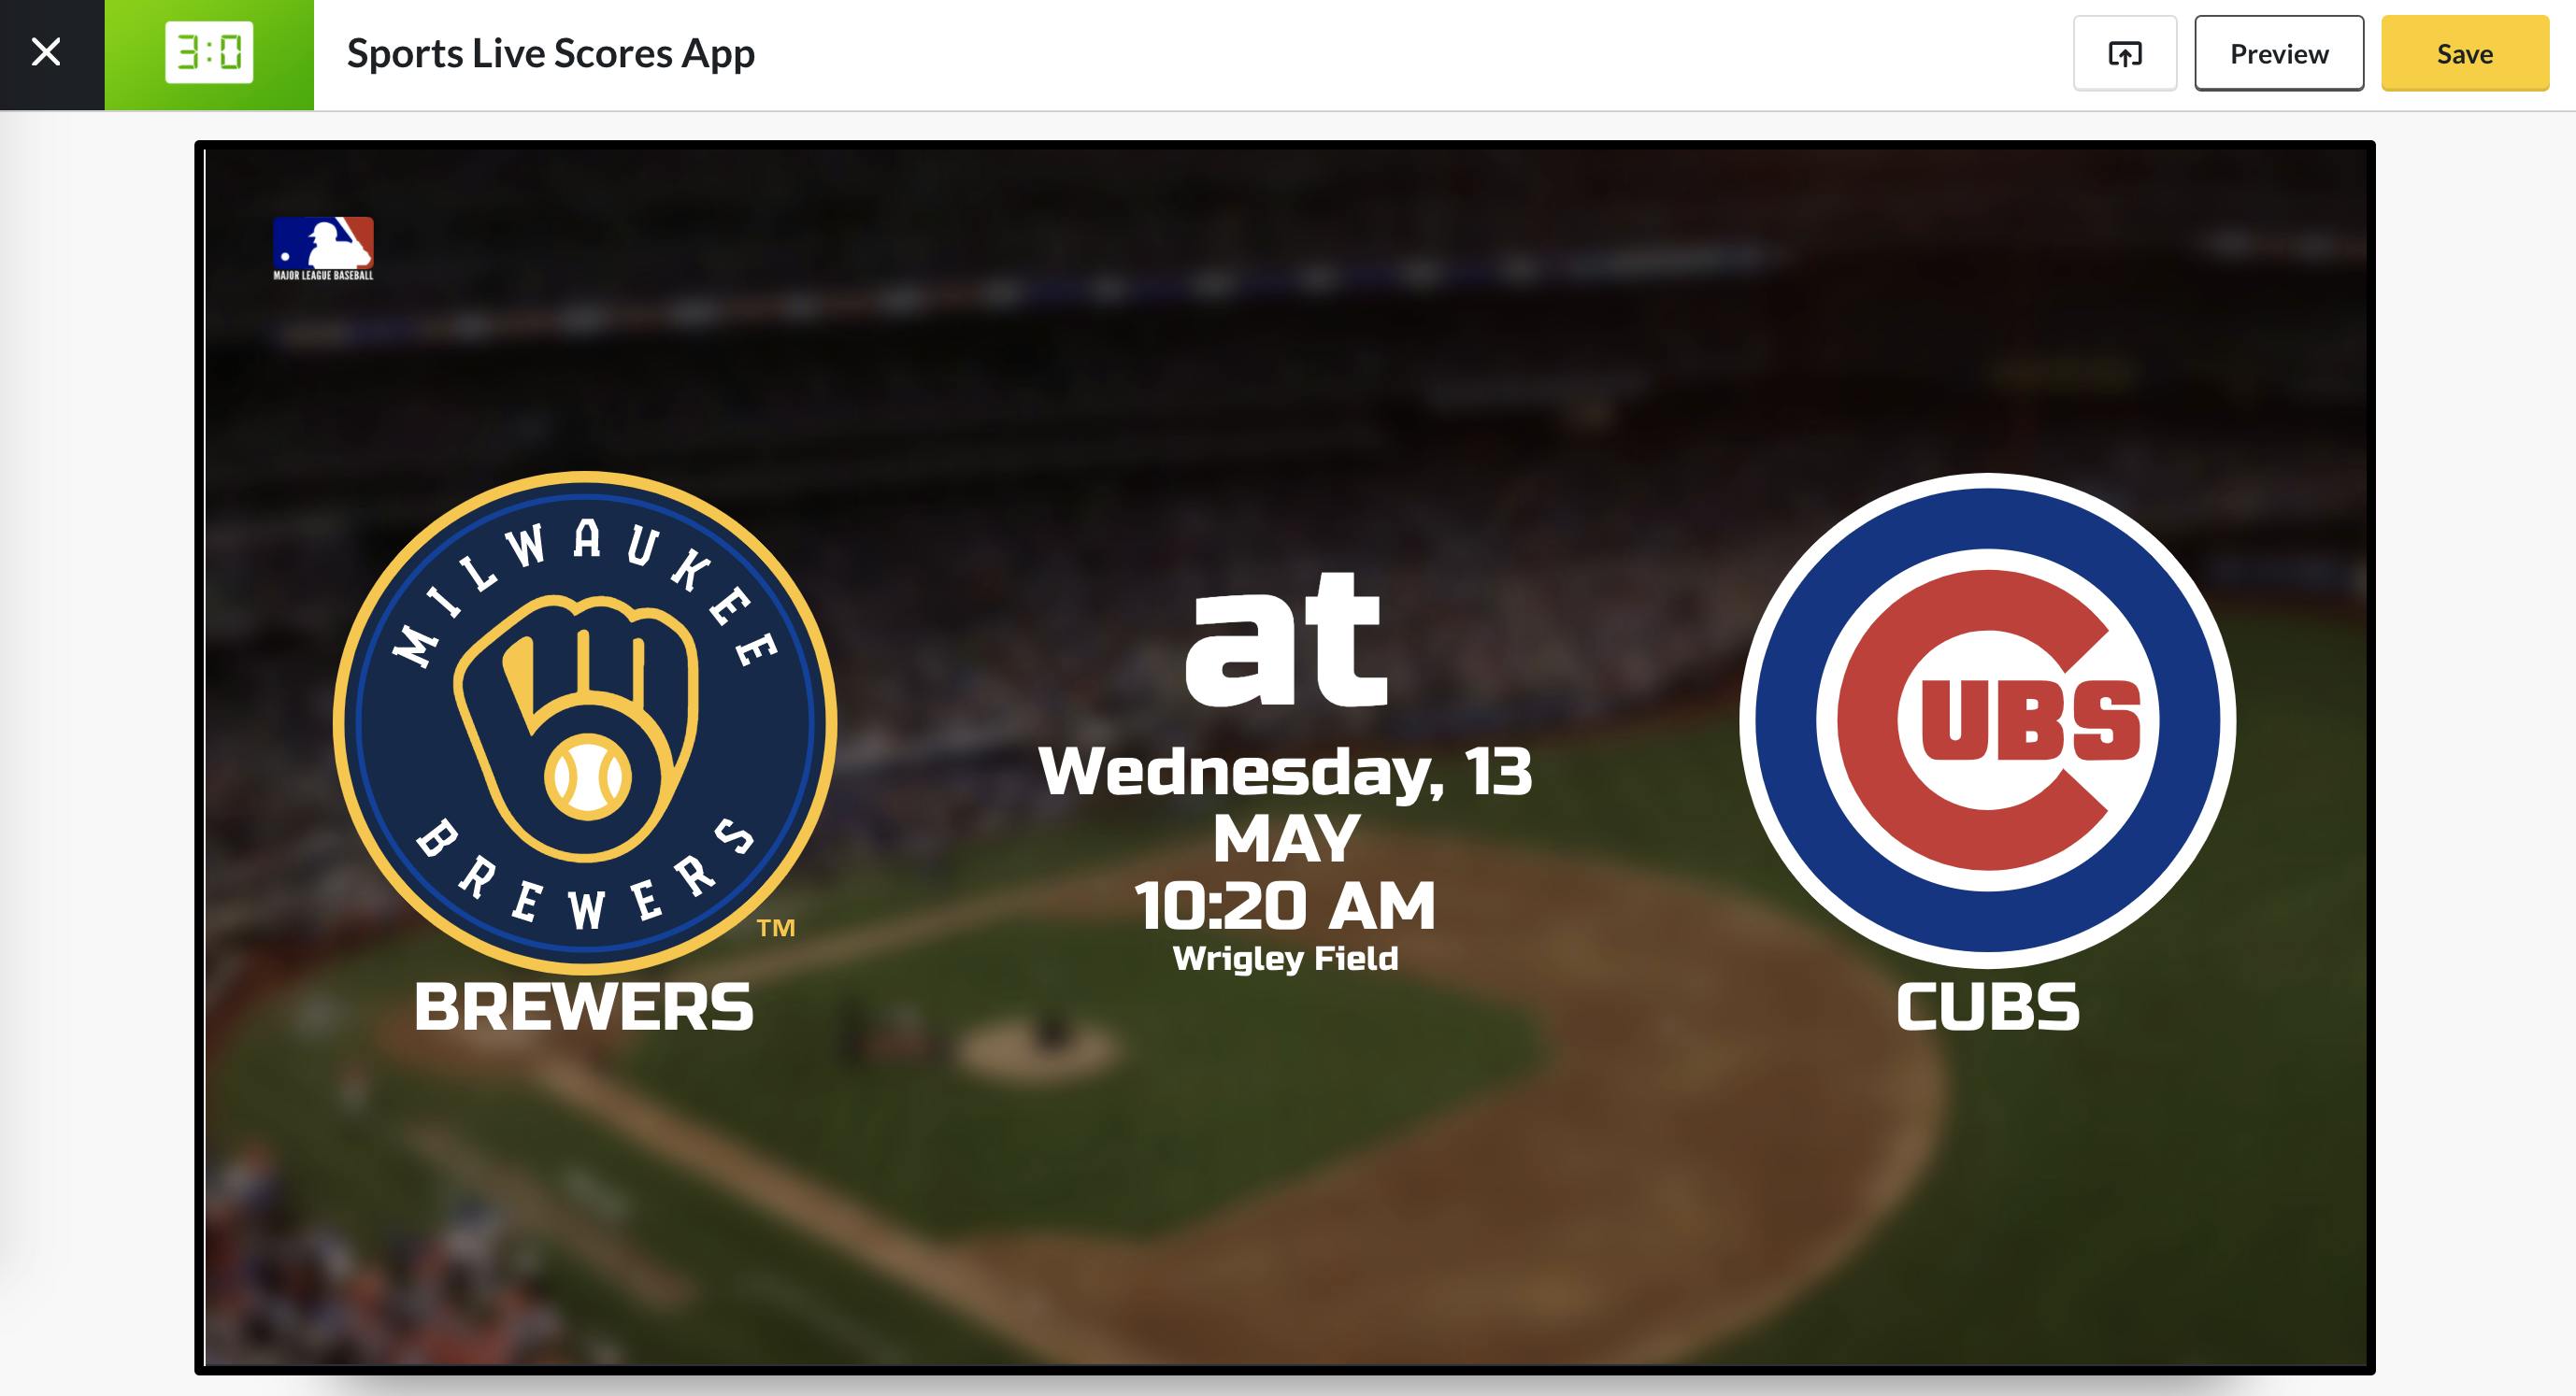 Sports Live Scores App - Preview 5.14.2020.png
